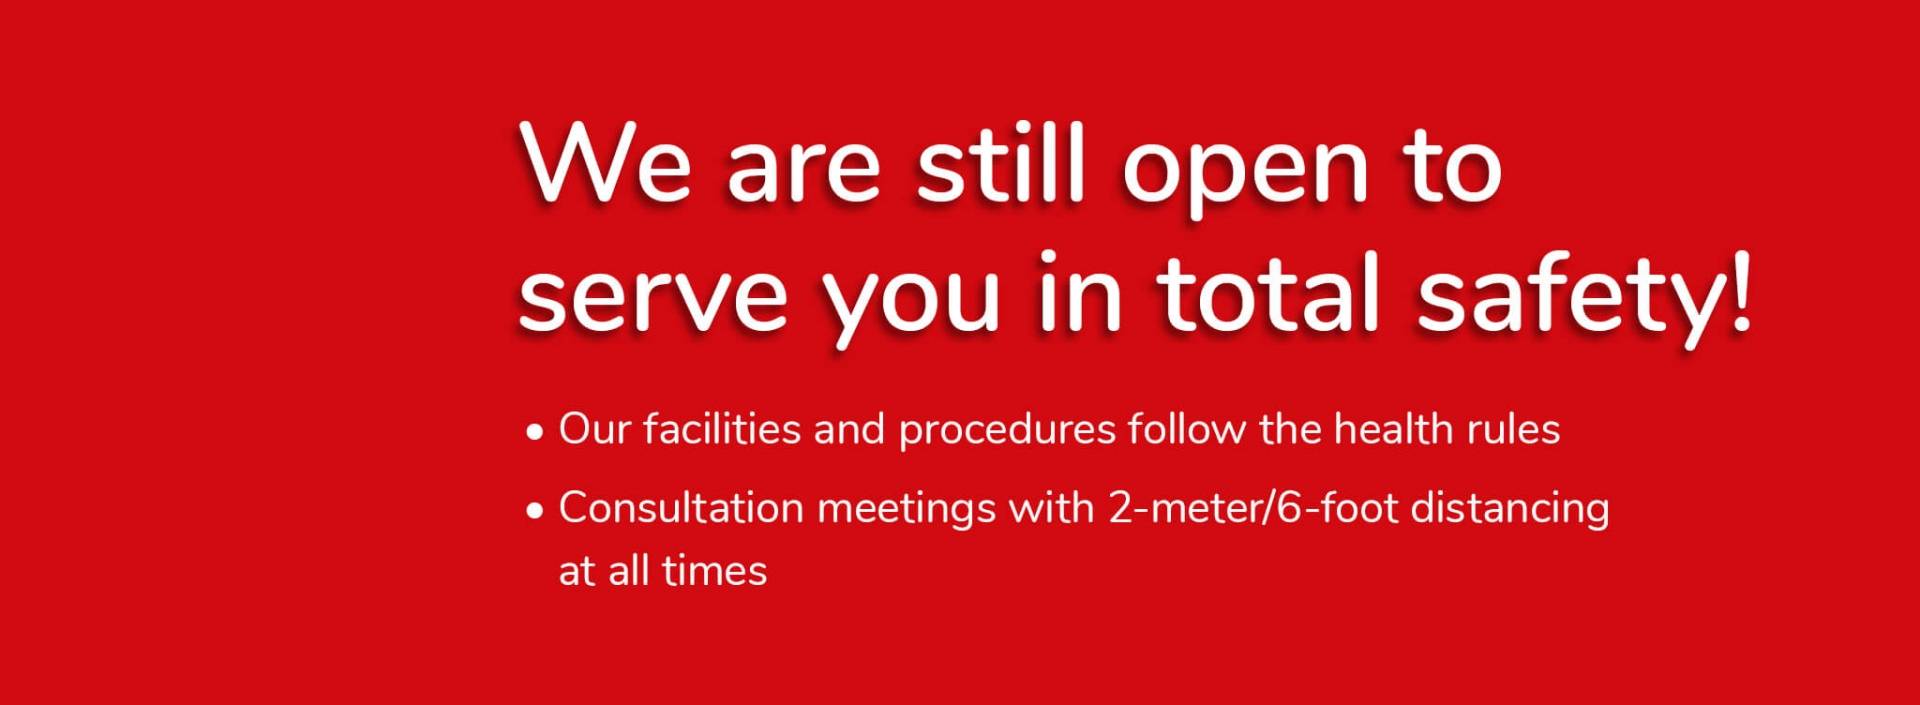 We are still open to serve you in total safety